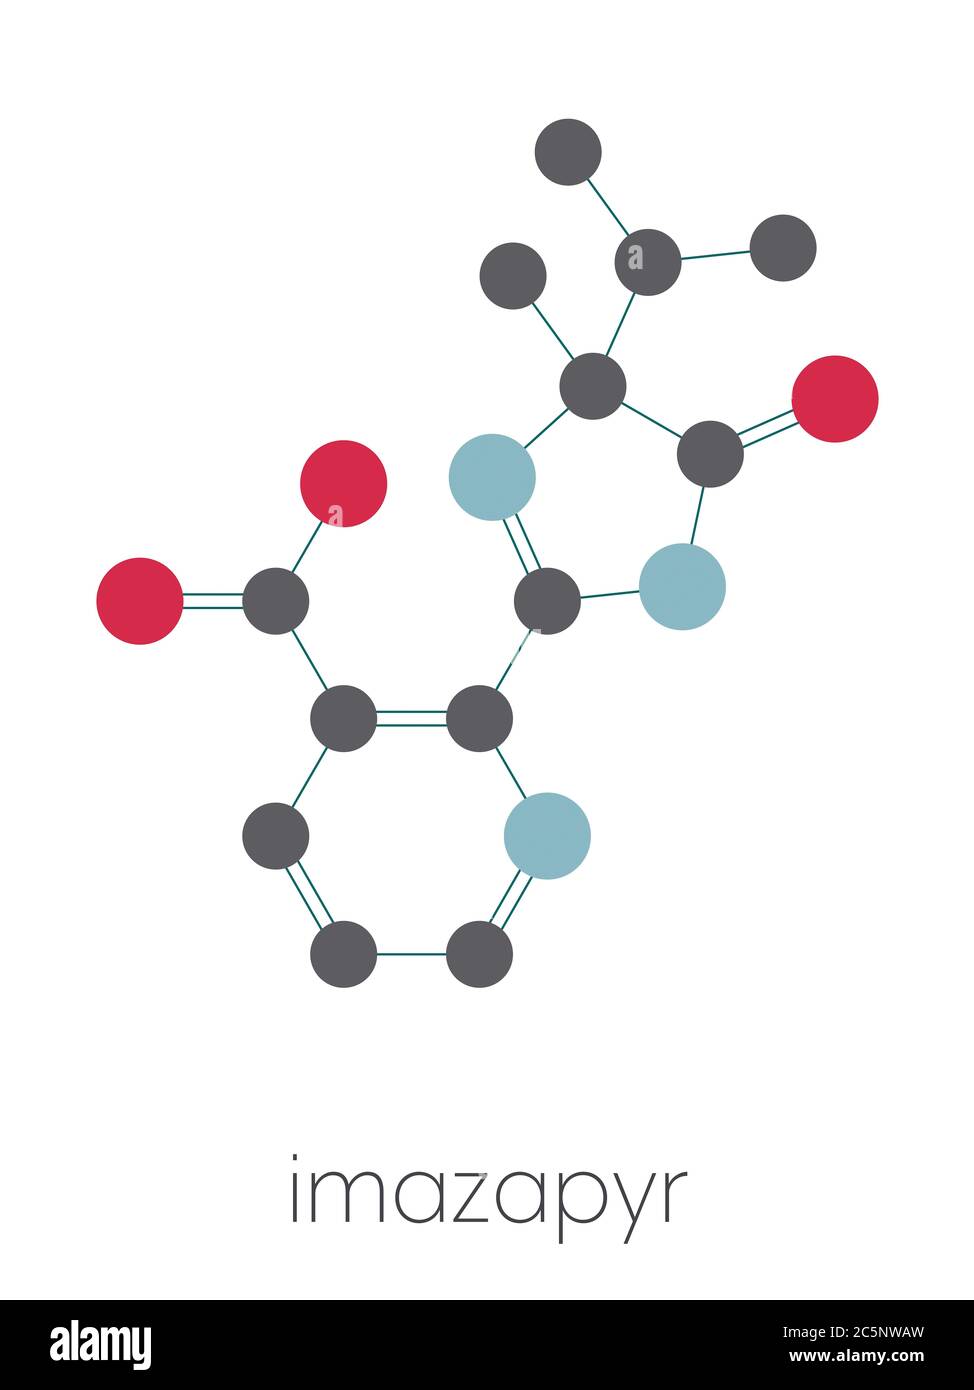 Imazapyr herbicide molecule. Stylized skeletal formula (chemical structure): Atoms are shown as color-coded circles: hydrogen (hidden), carbon (grey), nitrogen (blue), oxygen (red). Stock Photo